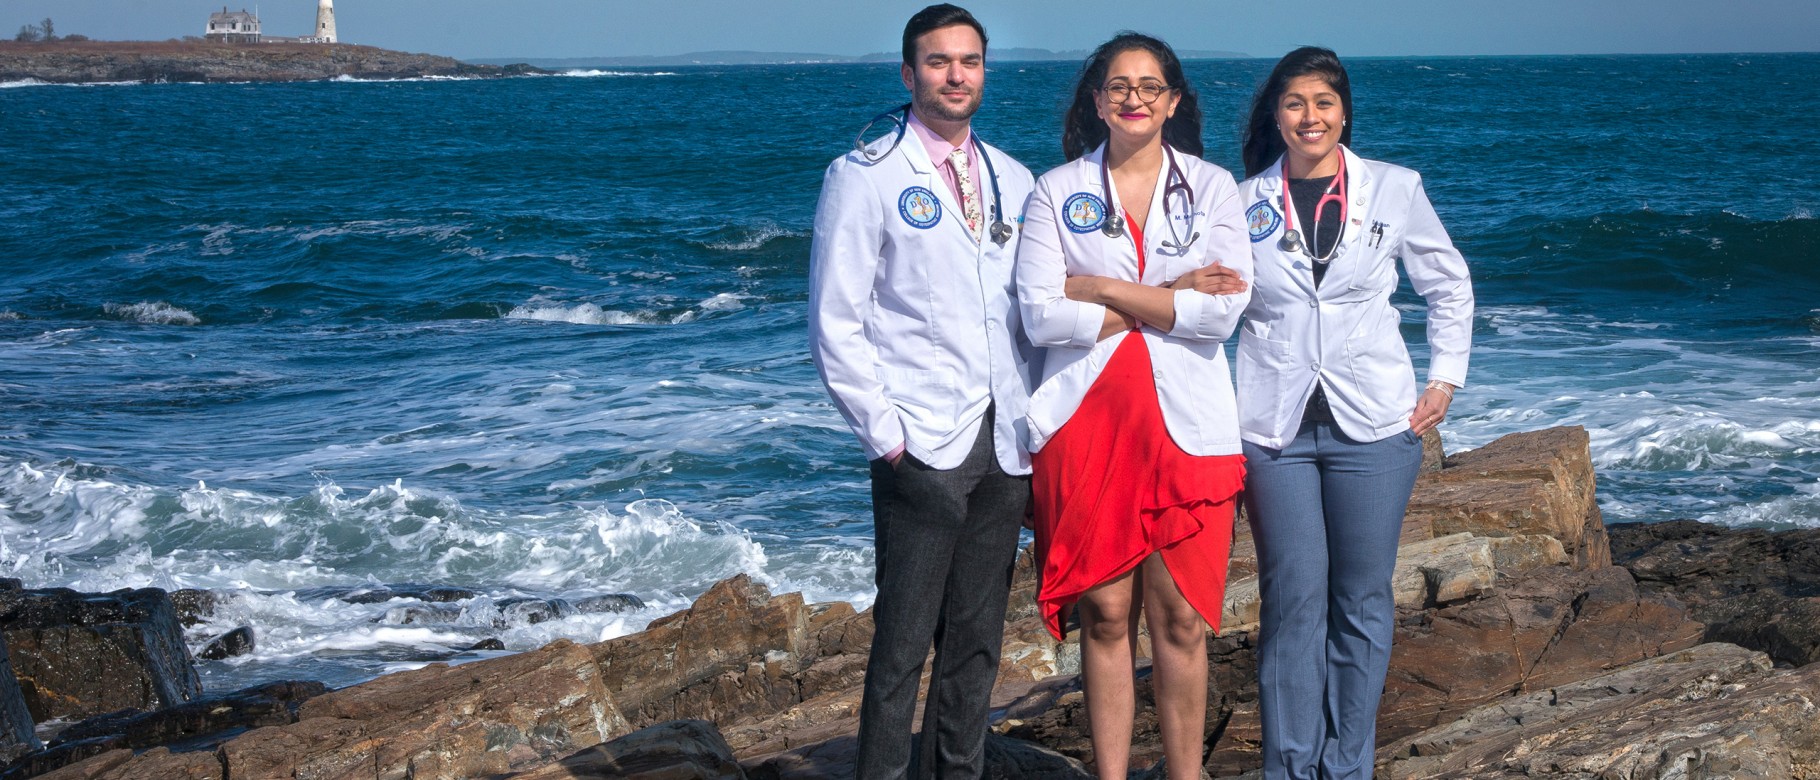 UNE ranked top osteopathic medical school for primary care among med schools nationwide